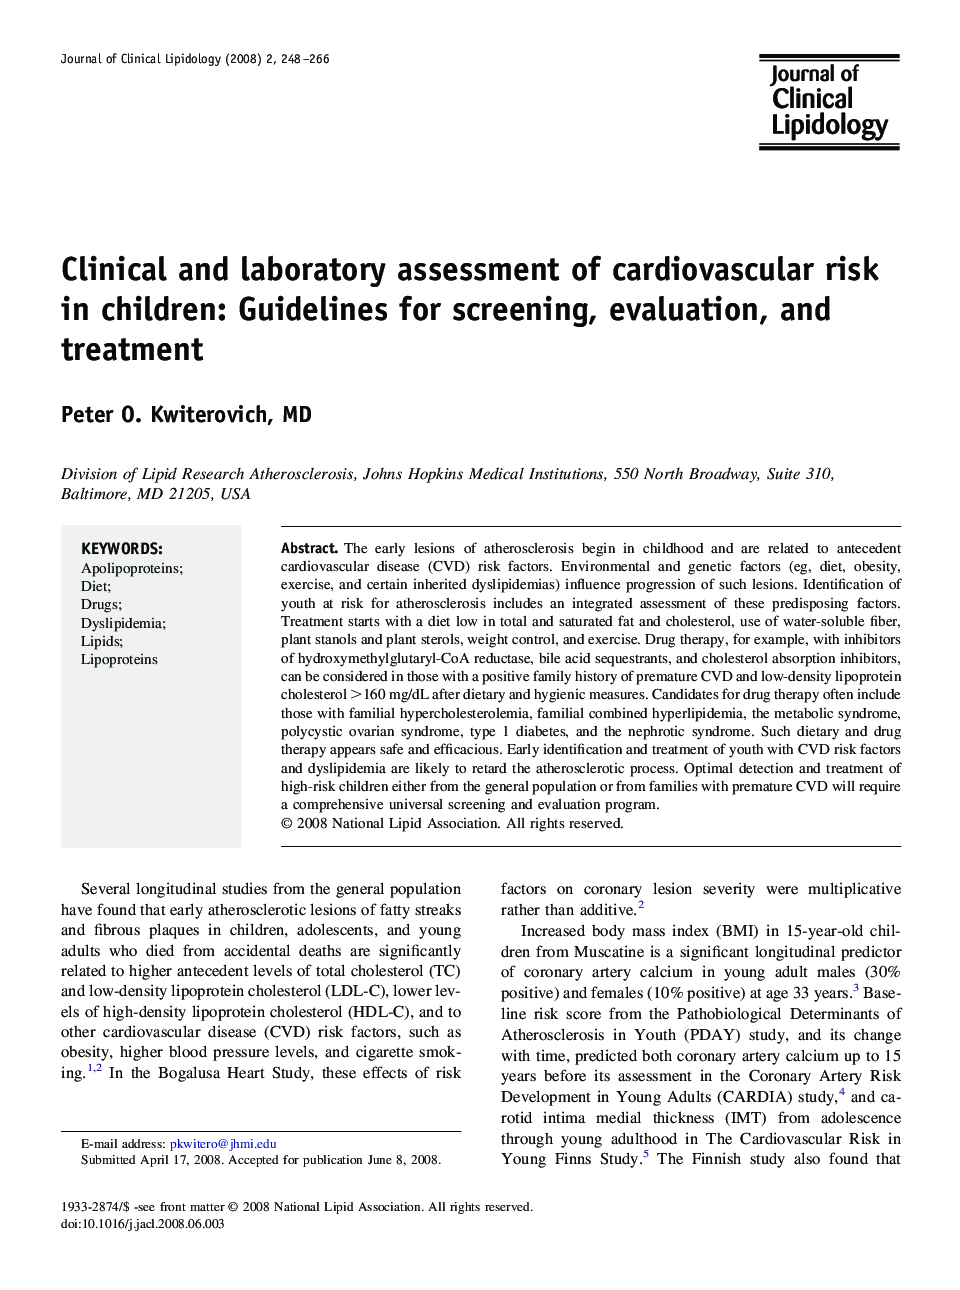 Clinical and laboratory assessment of cardiovascular risk in children: Guidelines for screening, evaluation, and treatment